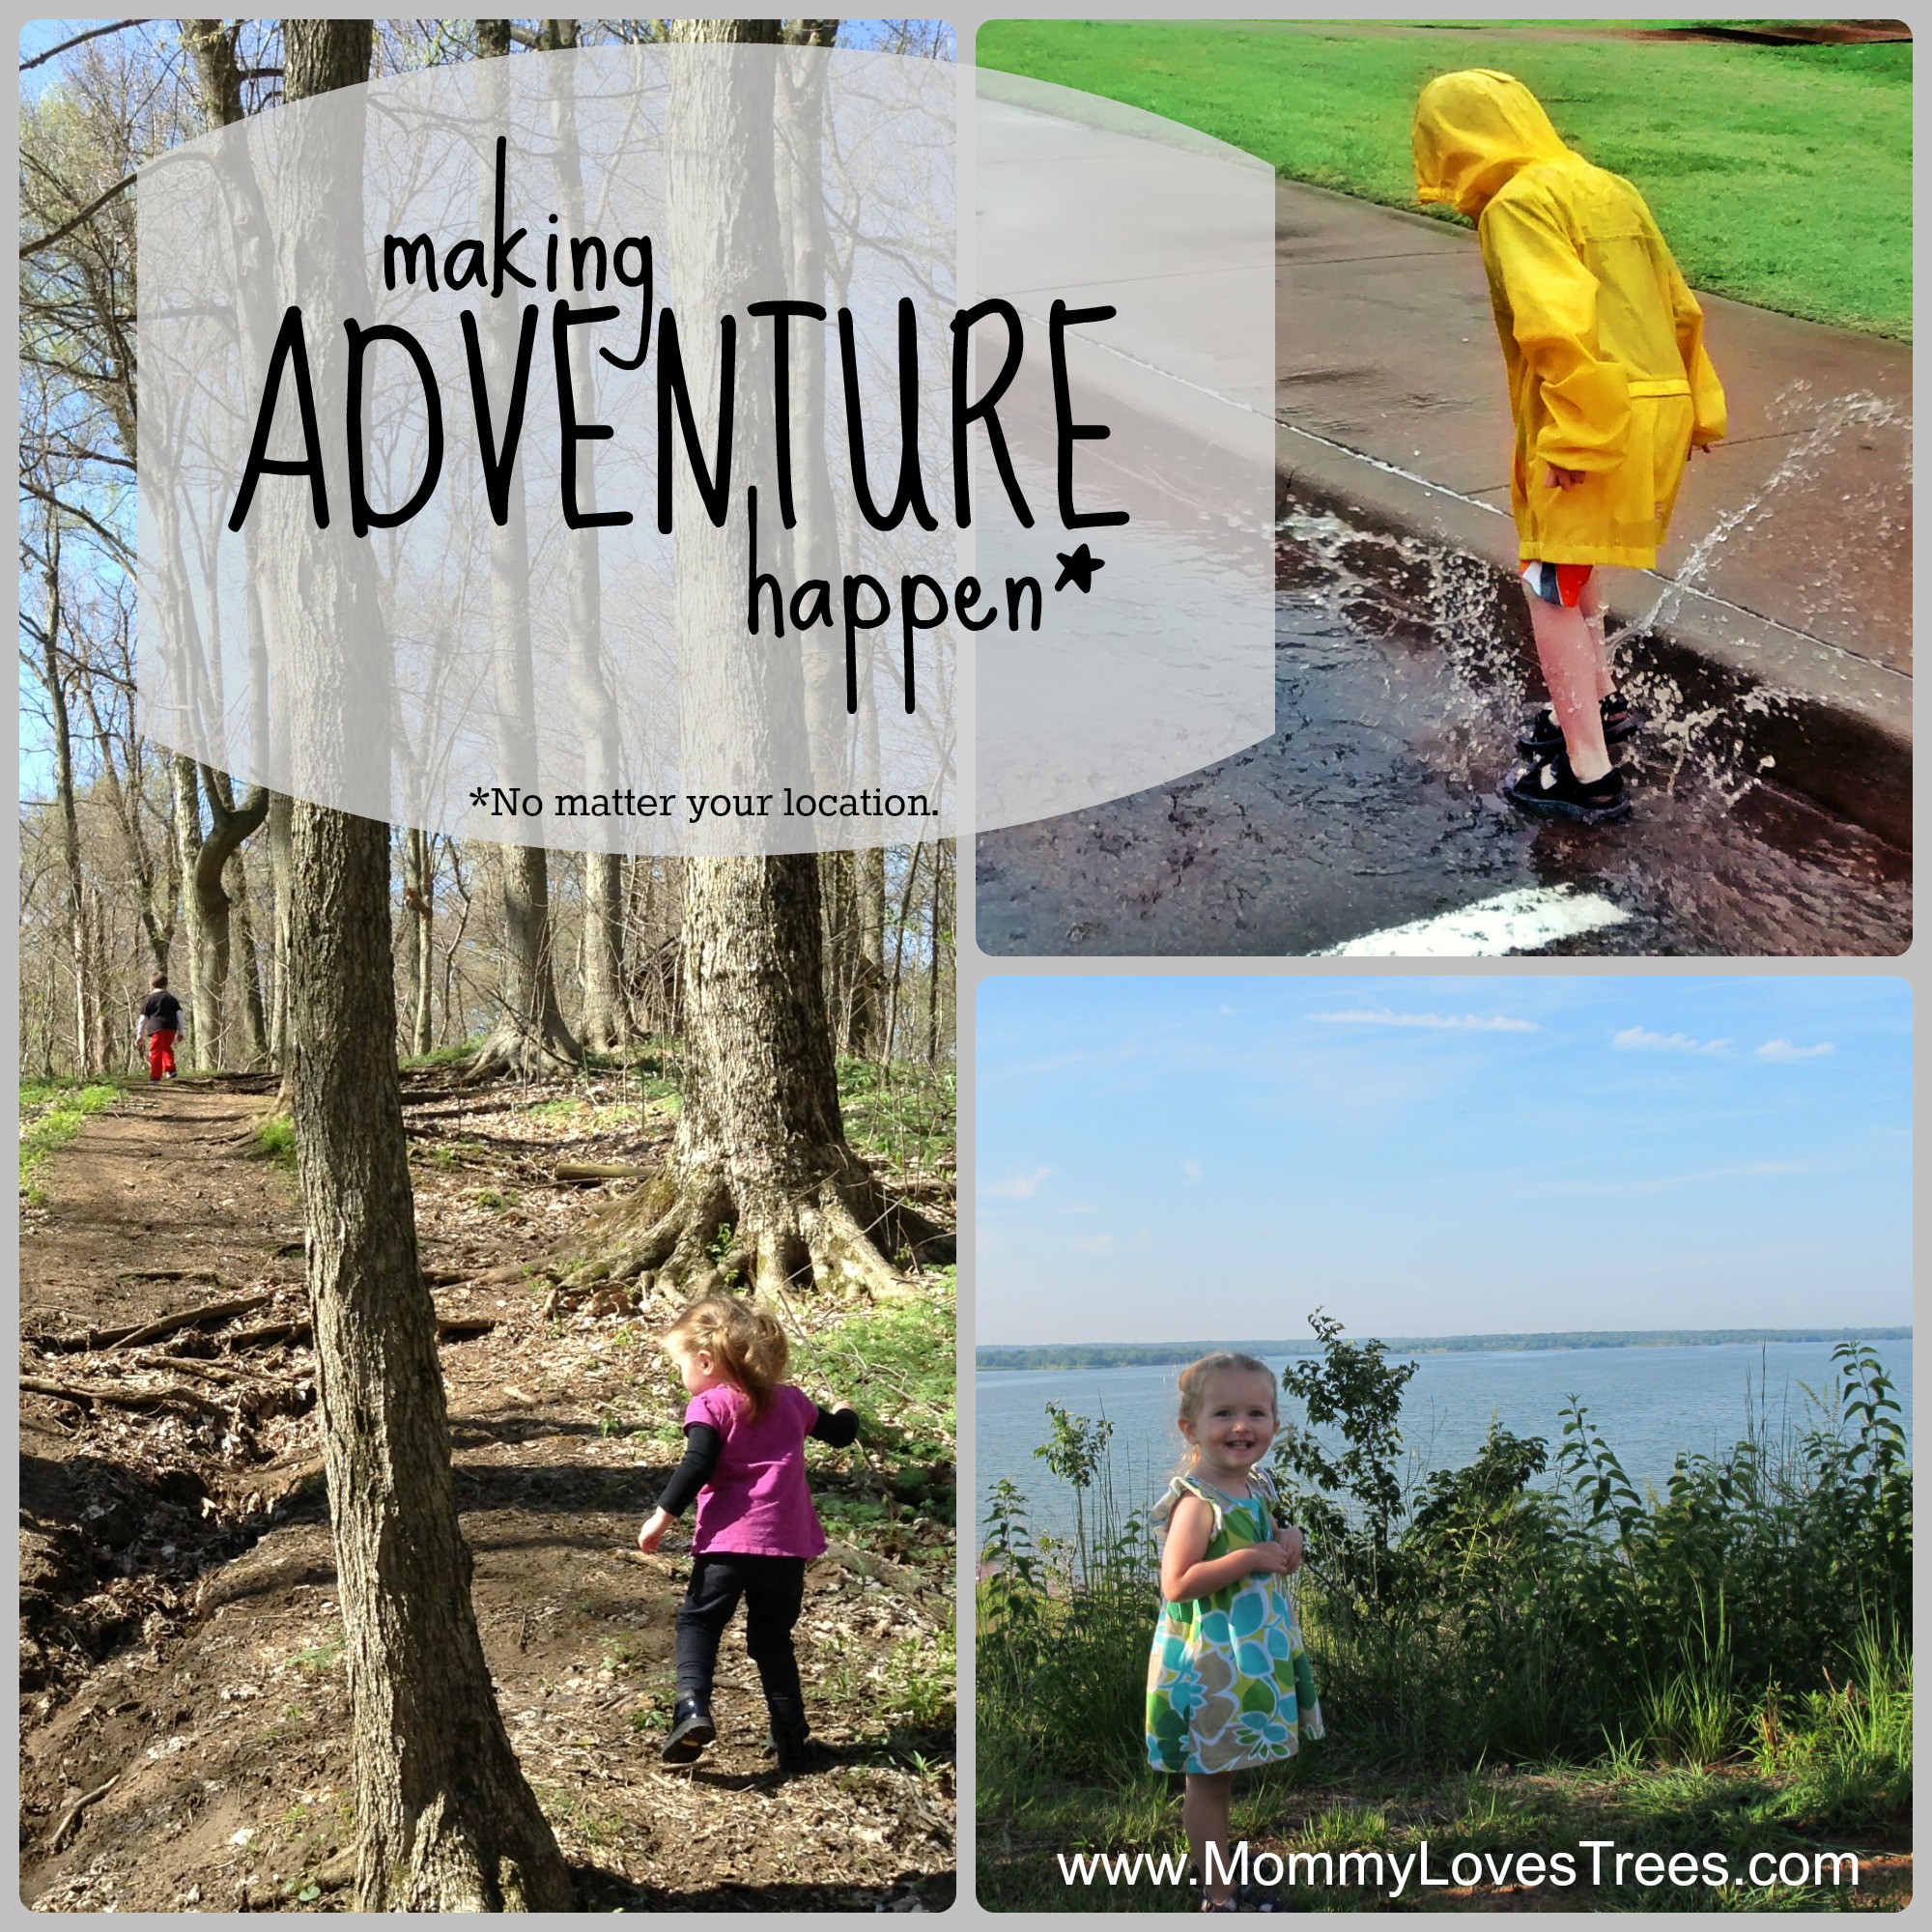 10 Ways to Make Adventure Happen by Mommy Loves Trees